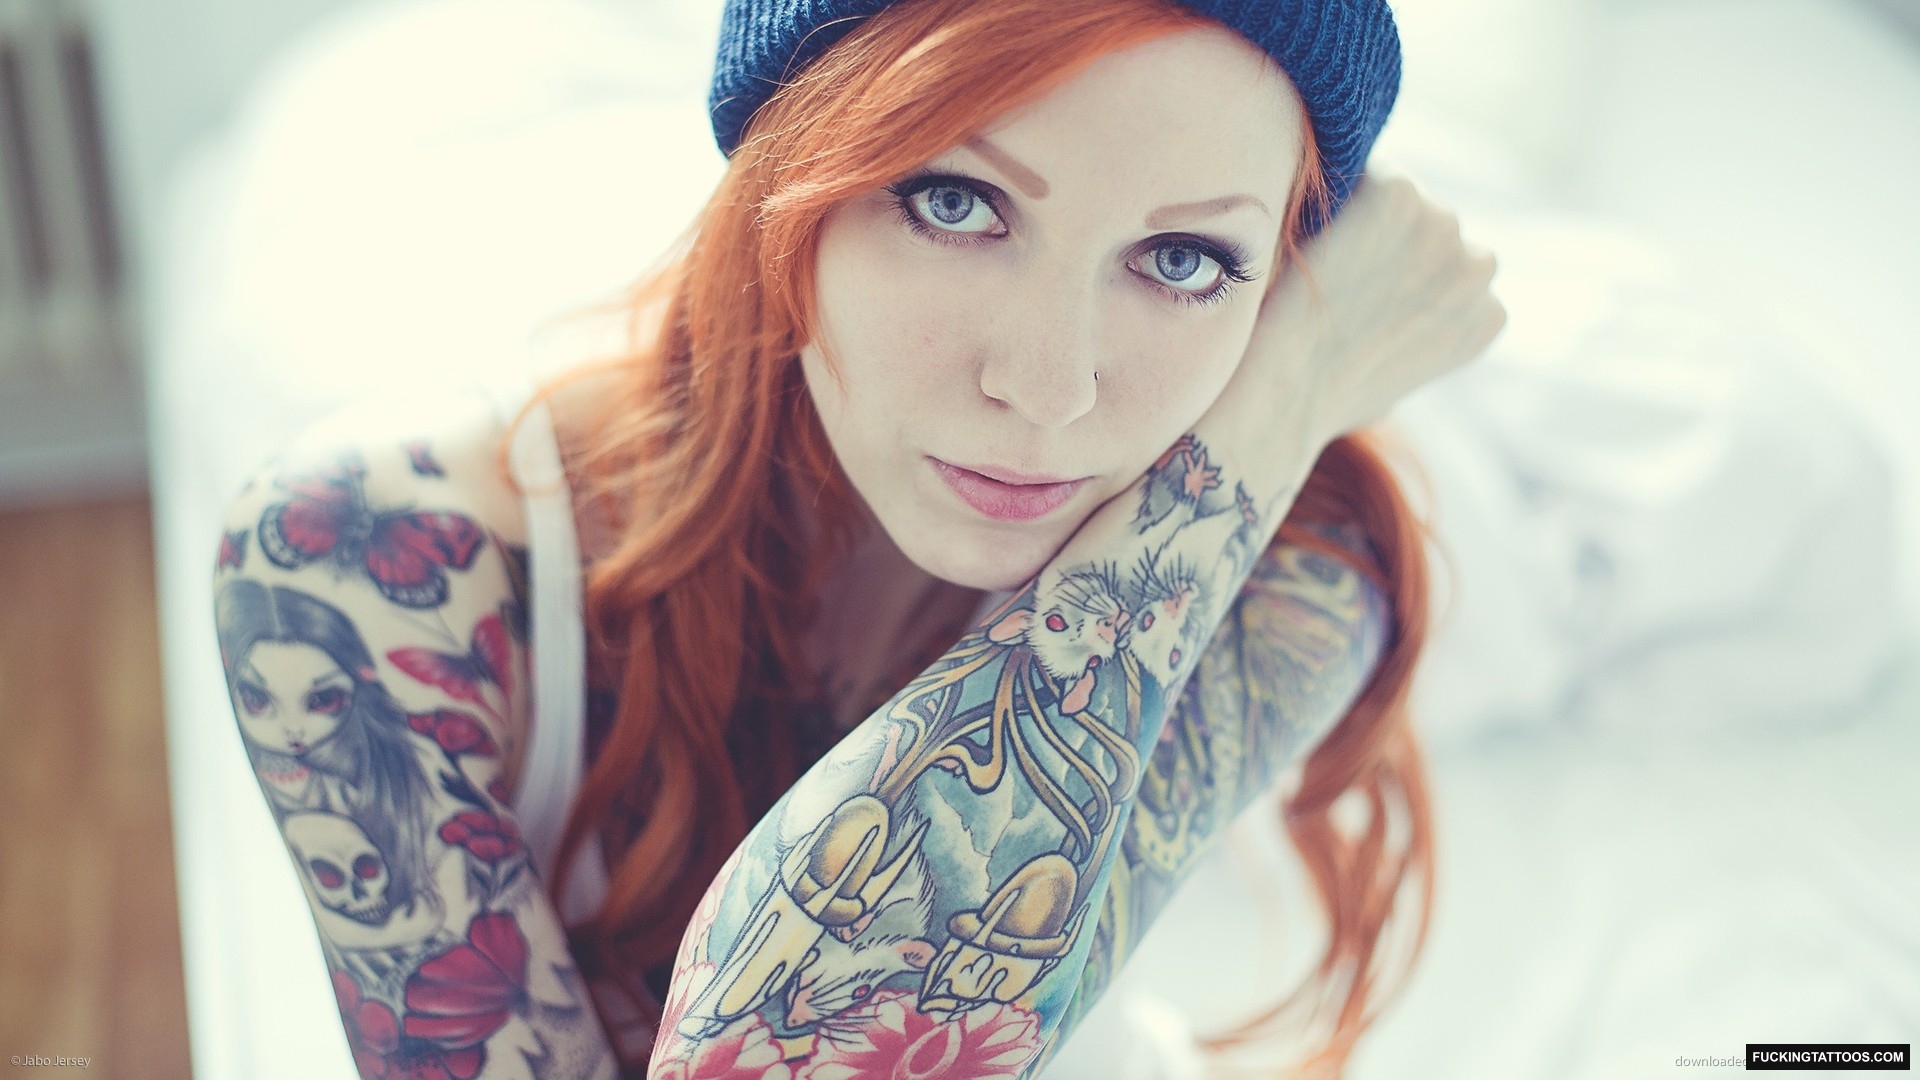 Cute Redhead With Blue Eyes And Sleeves. Decent Wallpaper